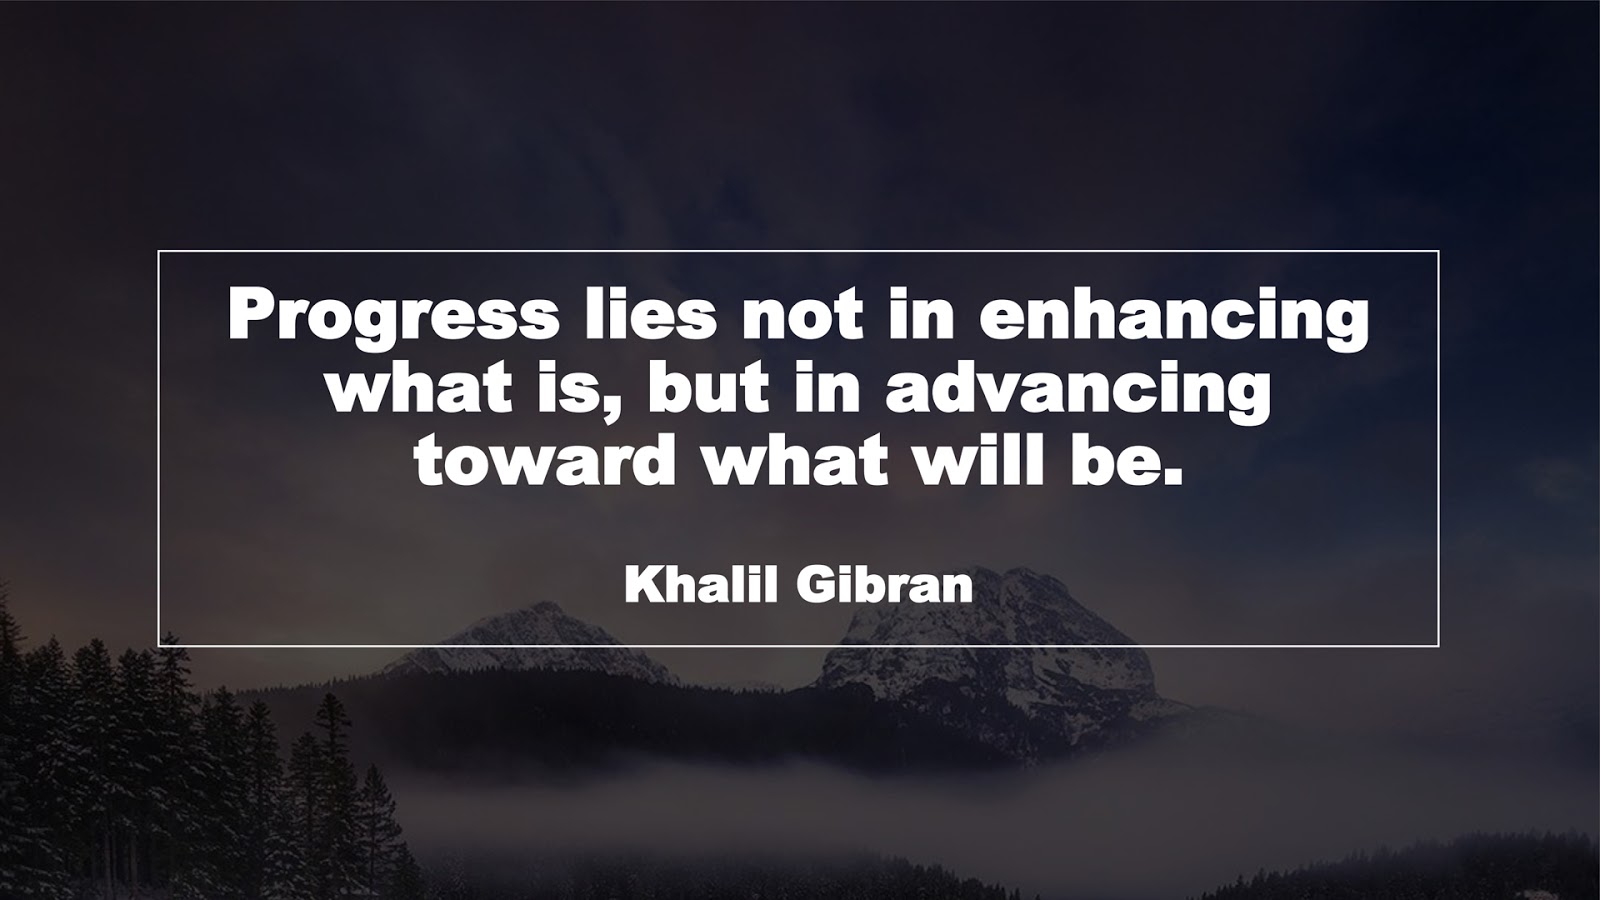 Progress lies not in enhancing what is, but in advancing toward what will be. (Khalil Gibran)